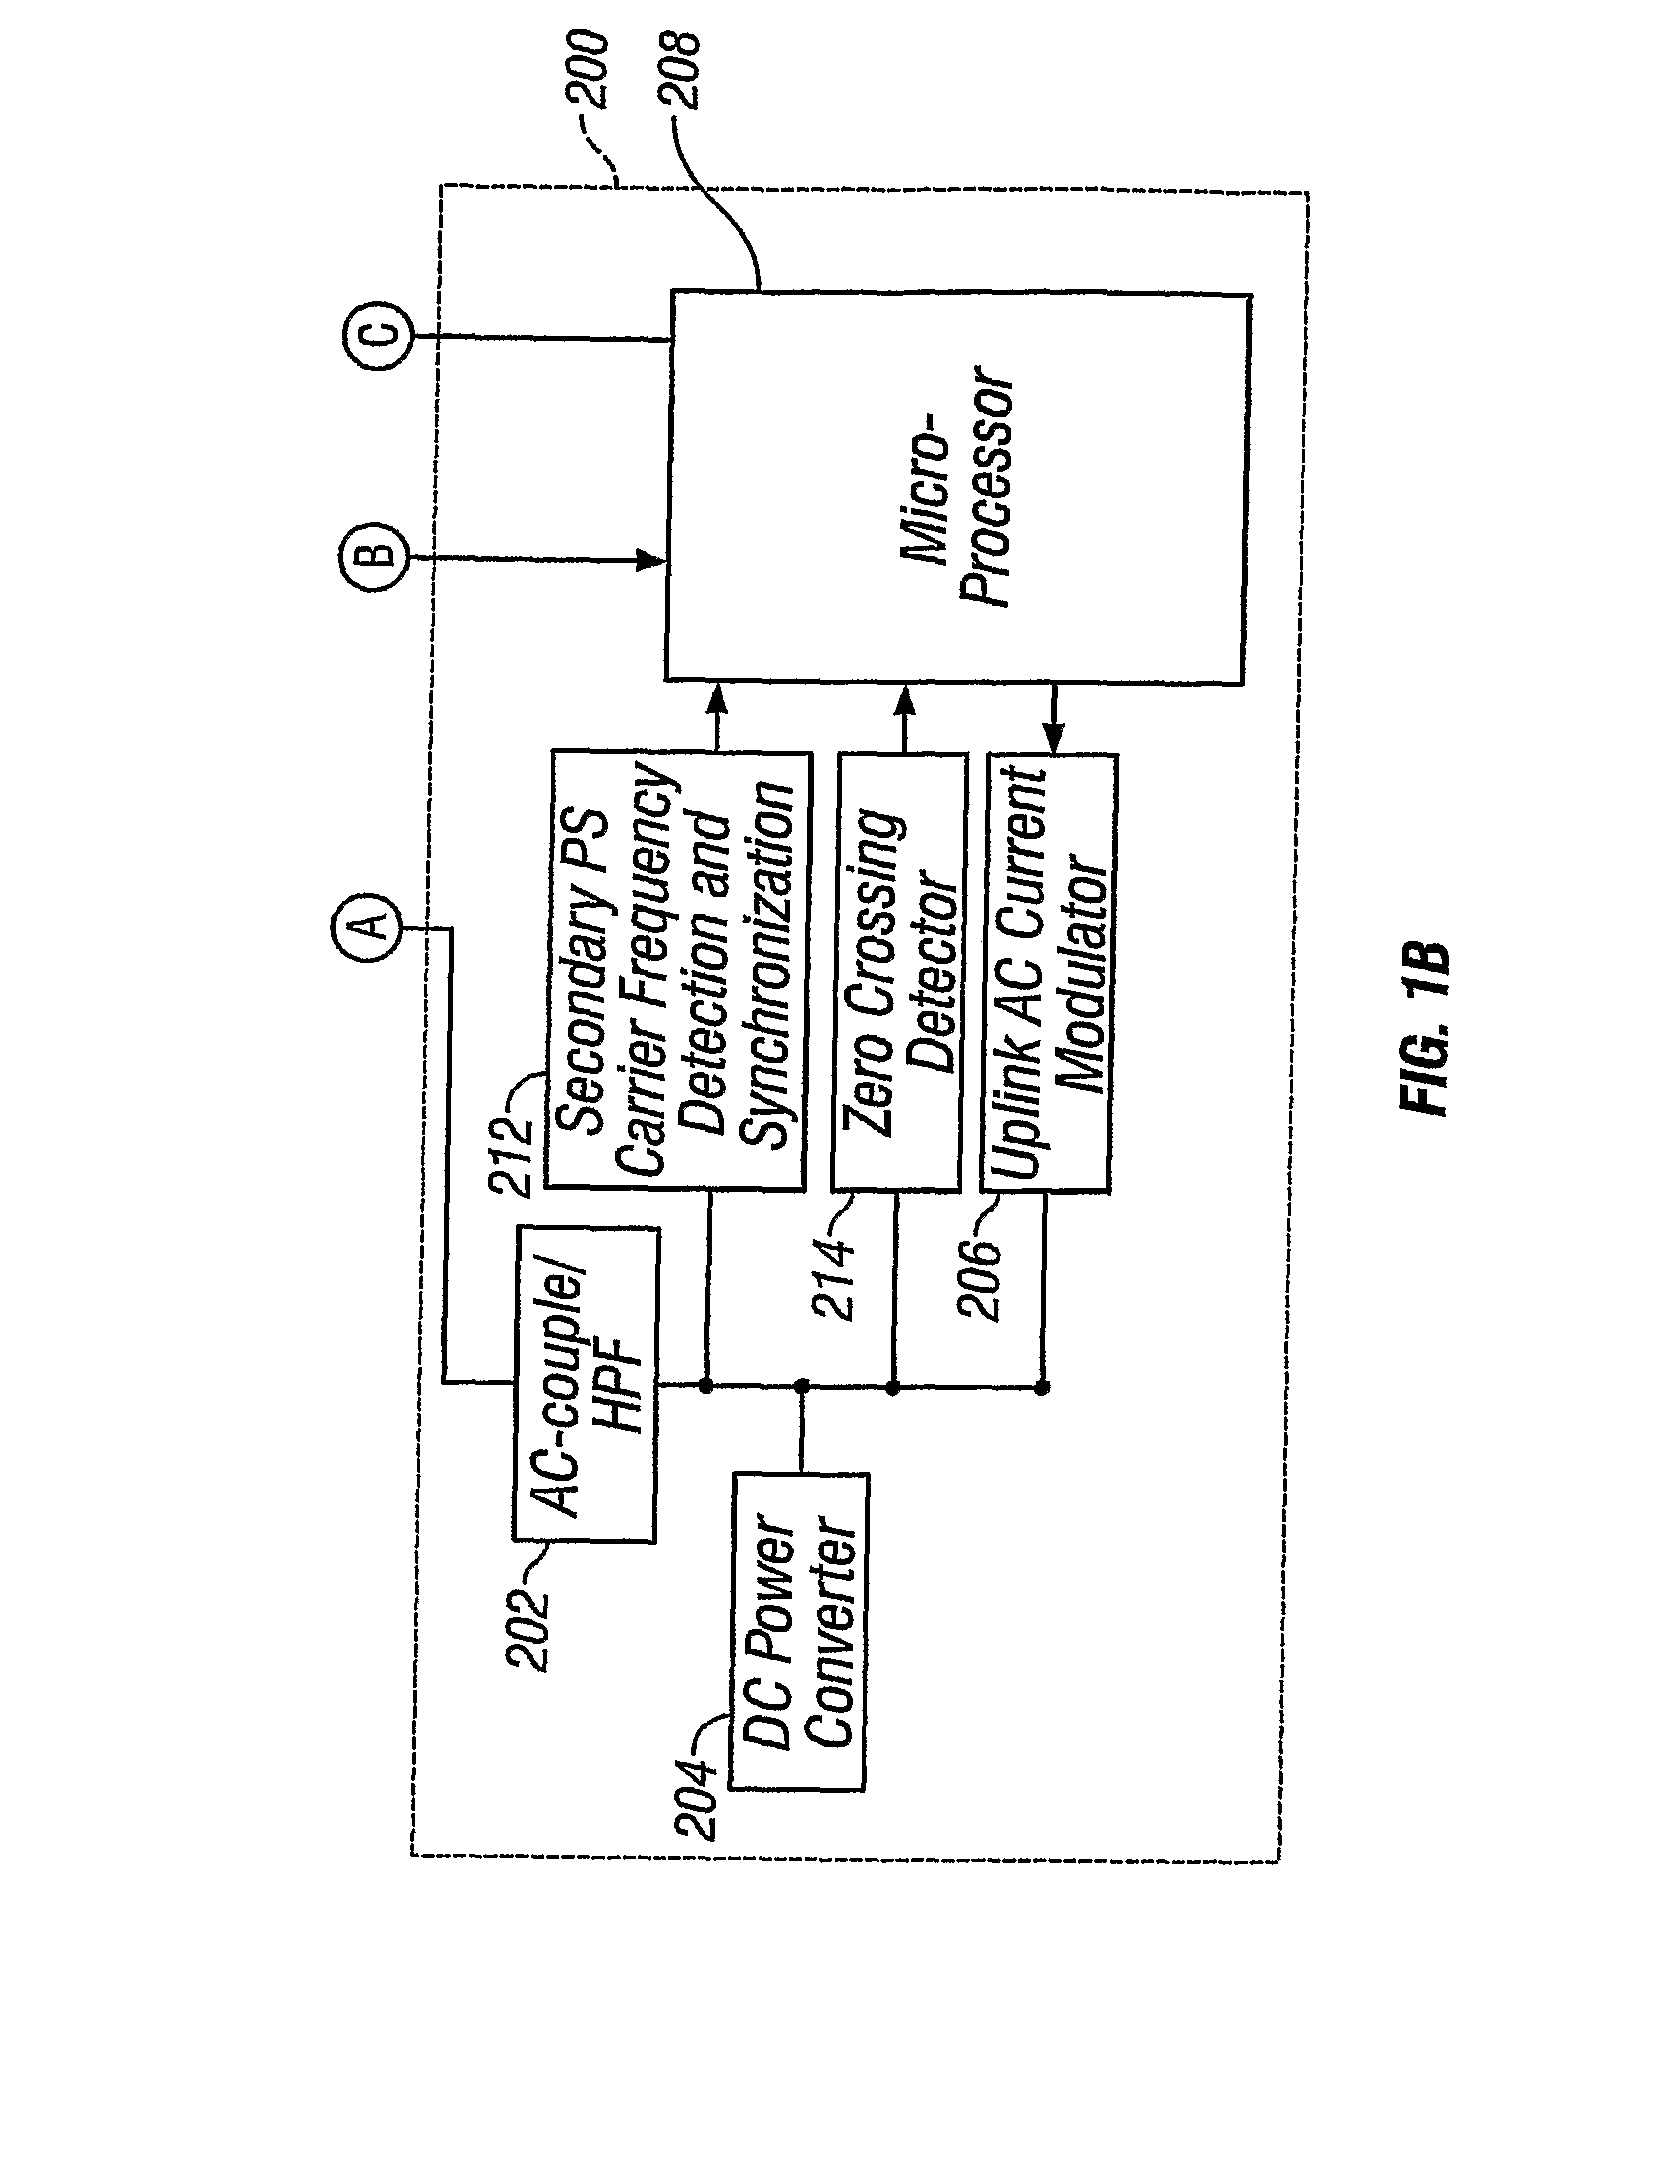 Data Communication and Power Supply System for Downhole Applications